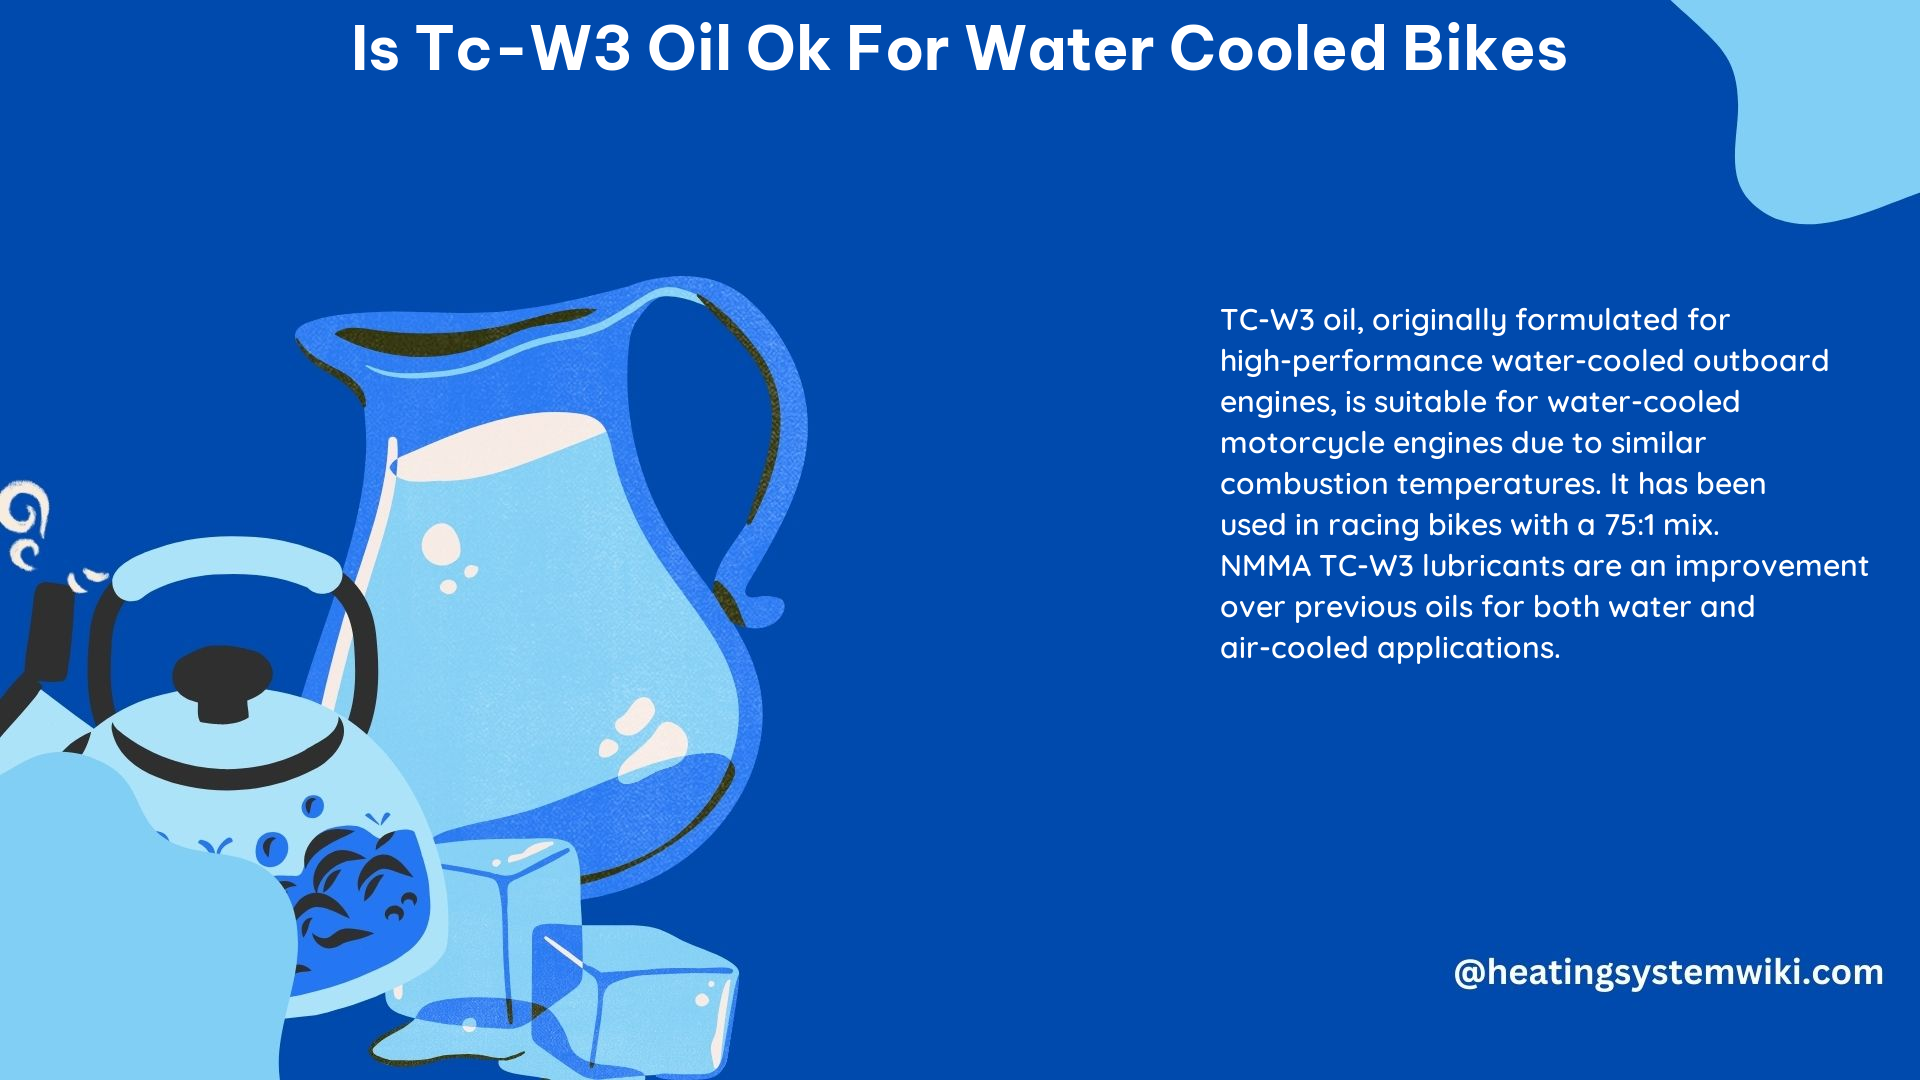 Is Tc-W3 Oil Ok for Water Cooled Bikes